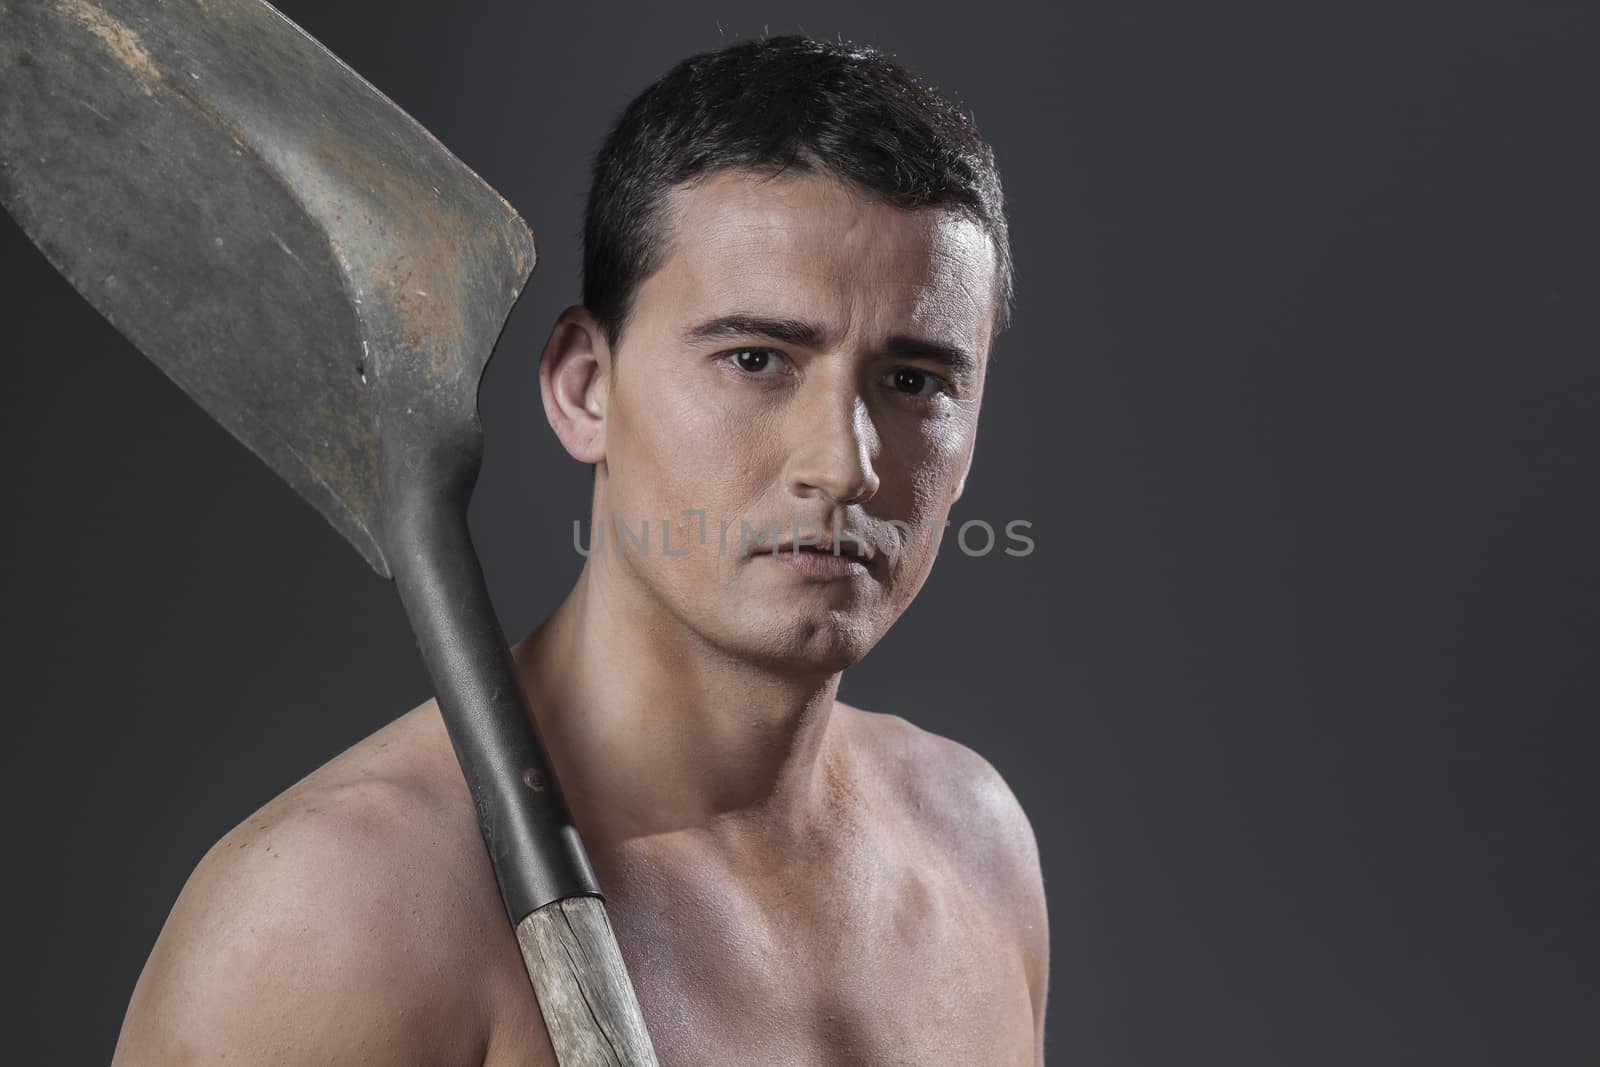 Safety, Male worker holding a shovel, sexy builder by FernandoCortes